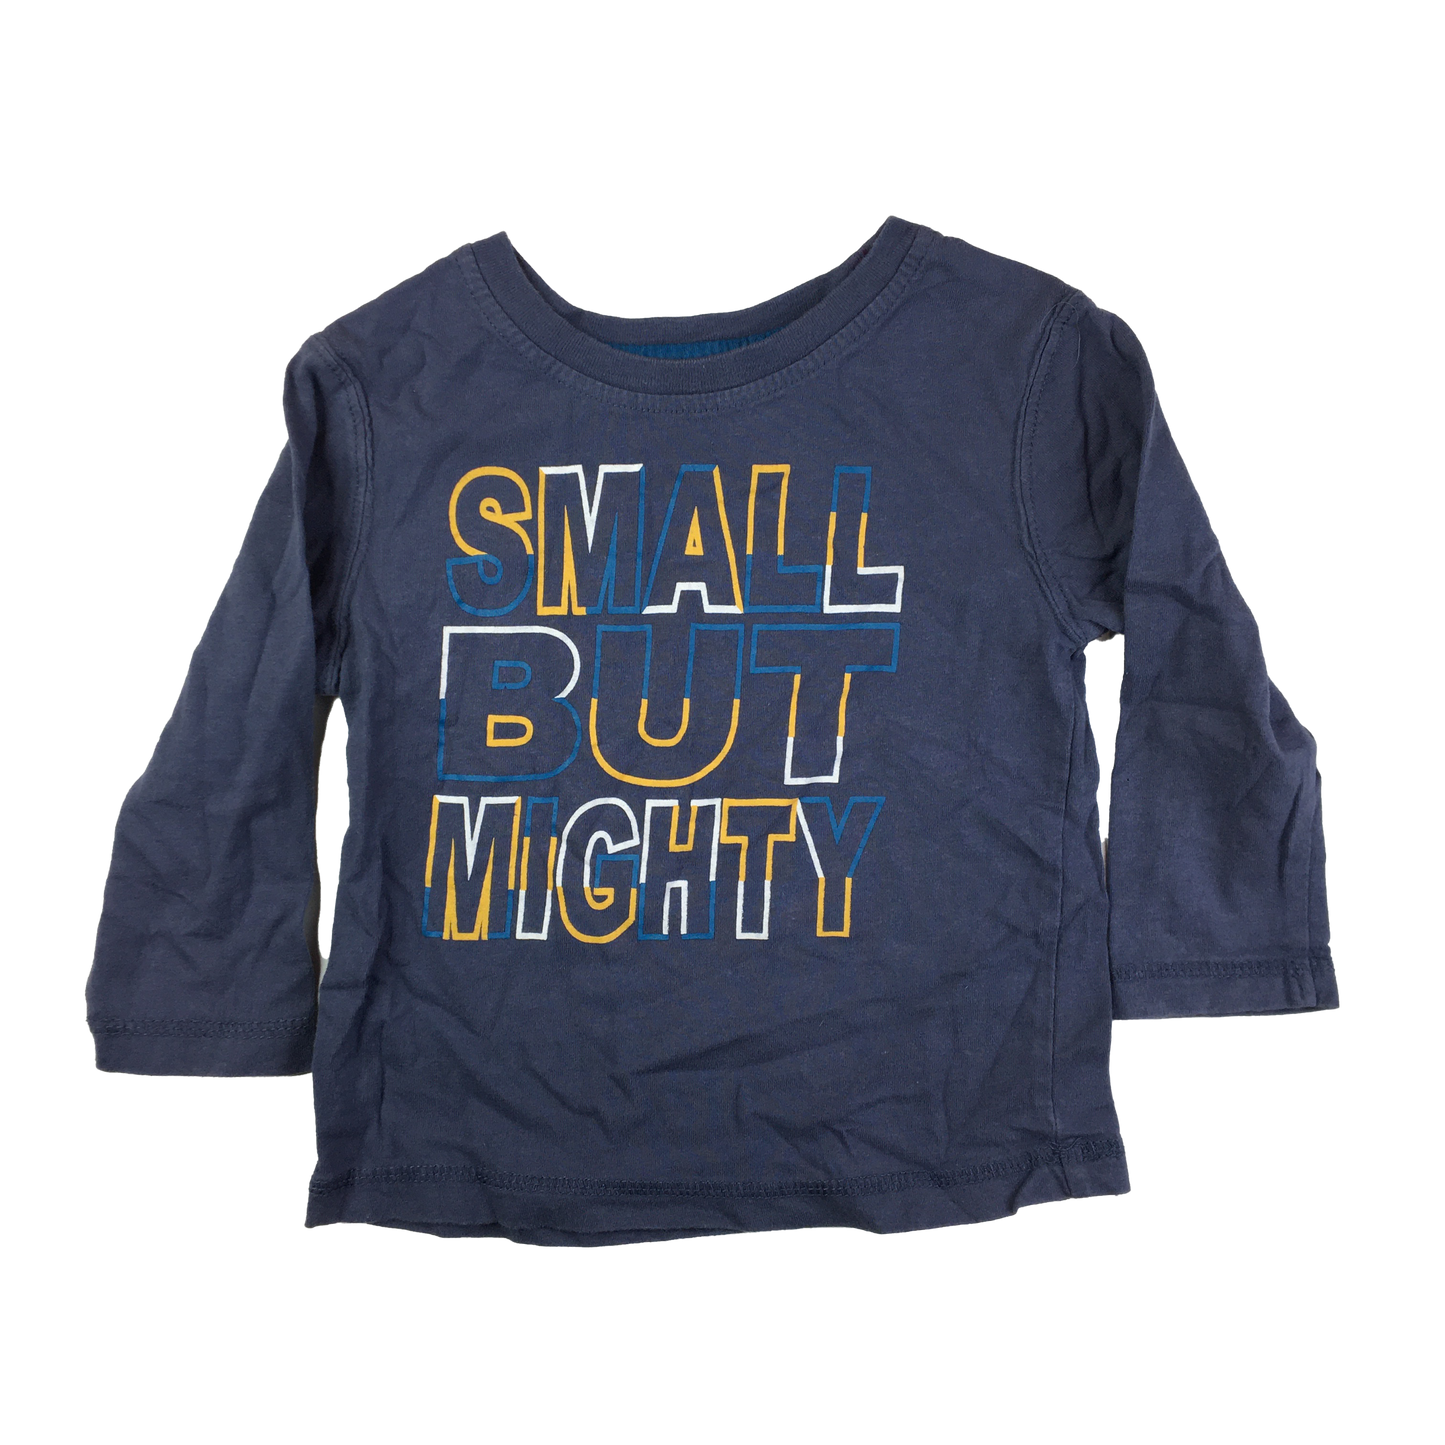 George Blue Long Sleeve with "Small But Mighty" 2T